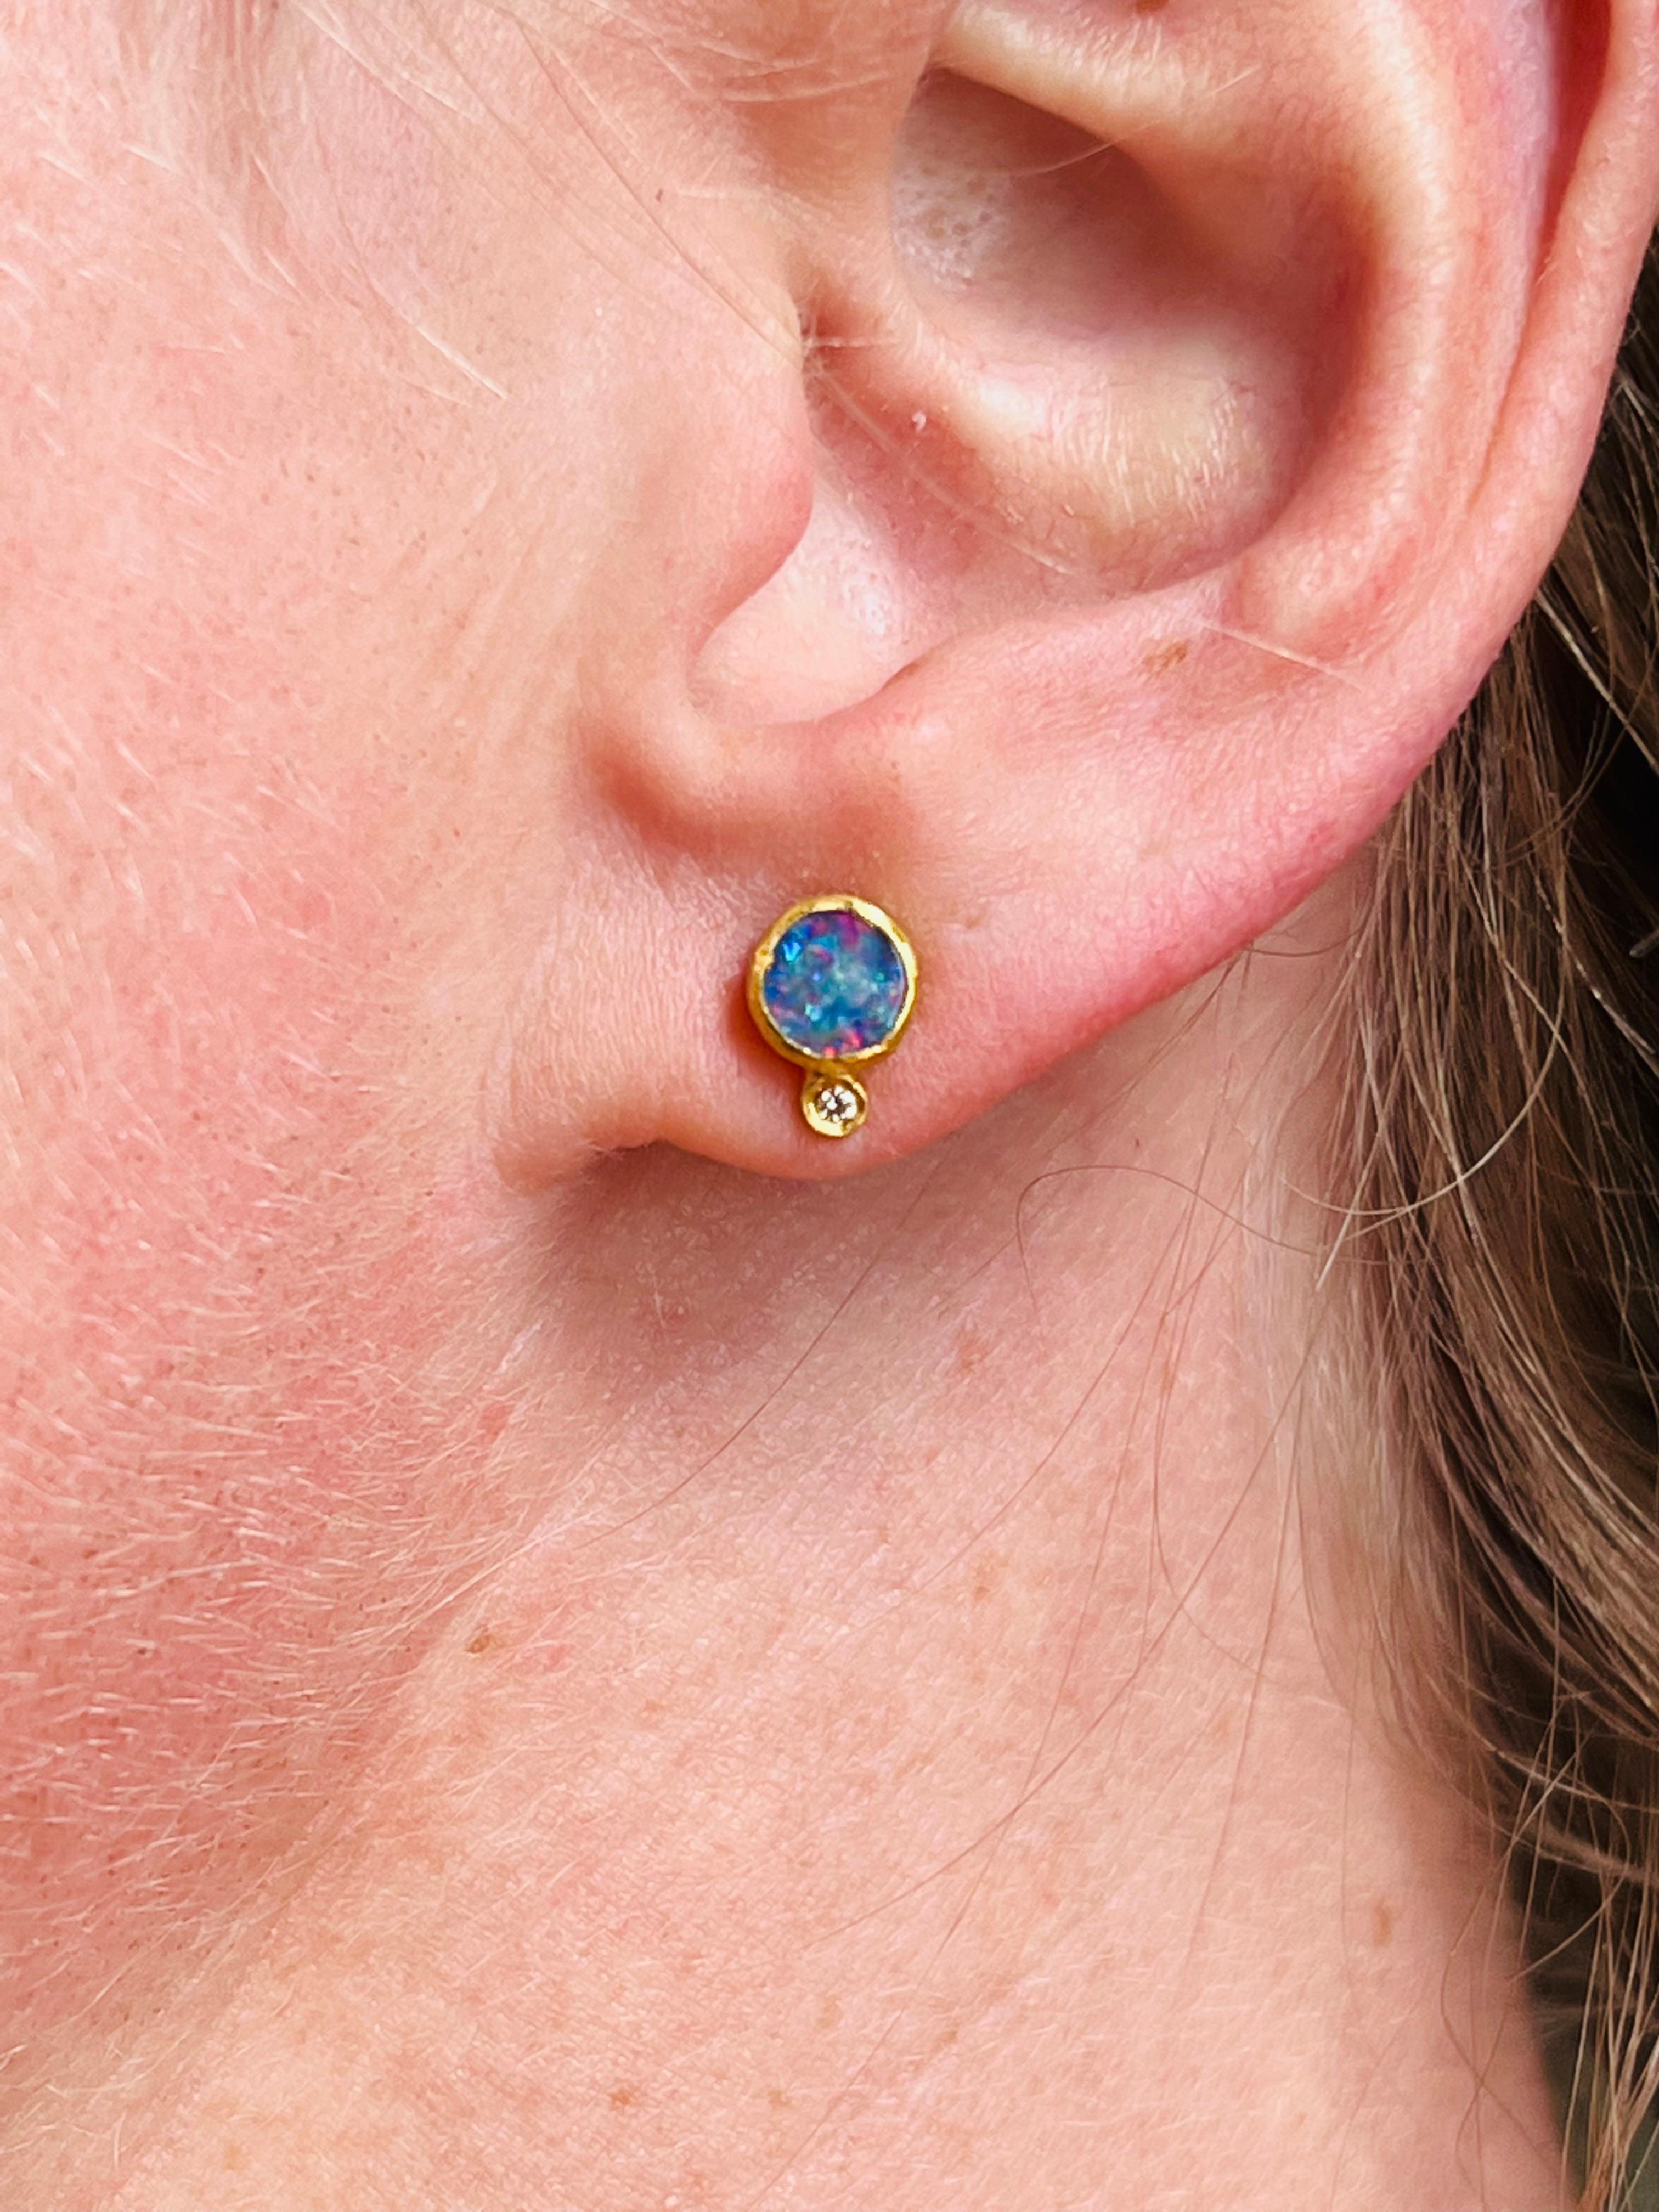 Opal with Diamond, Solid 24K Post Earrings // By Kurtulan of Istanbul Turkey. Delicate posts with tiny diamond detail. 24kt Solid Yellow Gold earrings with posts and backs.  Delicate and striking, these lovely rainbow-opals are sure to shine.  With